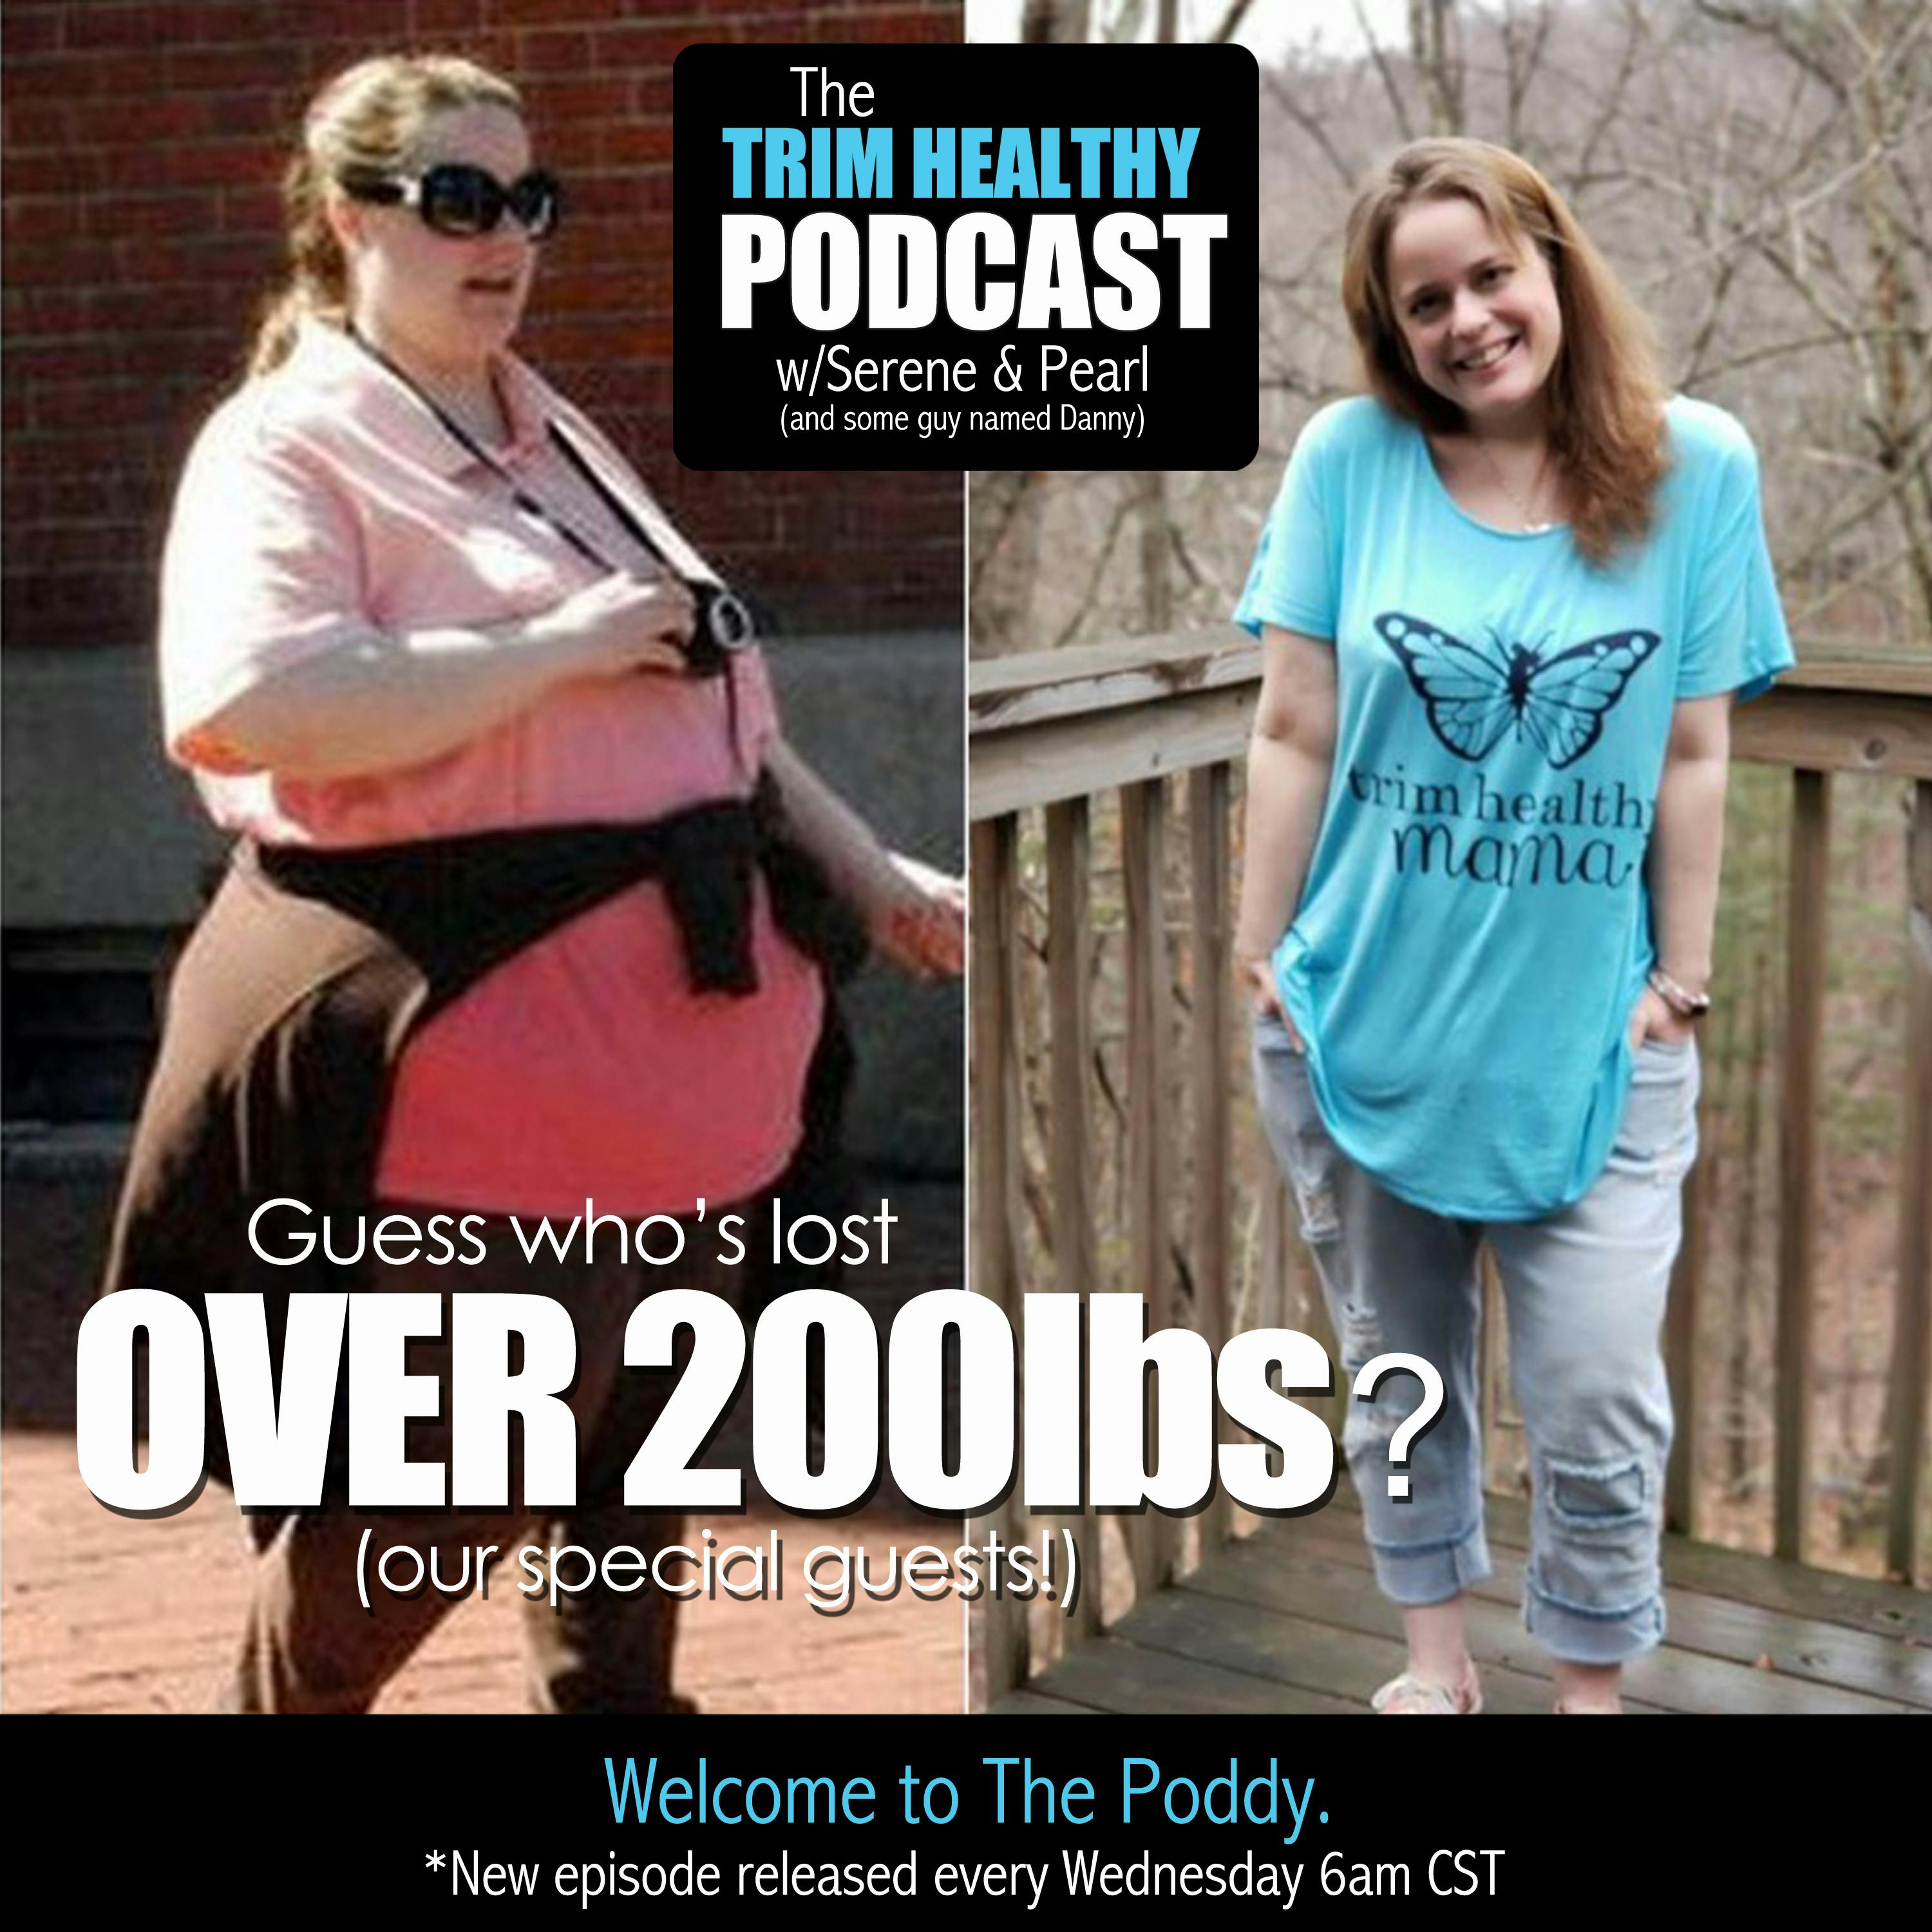 Ep. 135: Guess who’s lost over 200lbs between them? Our special guests!